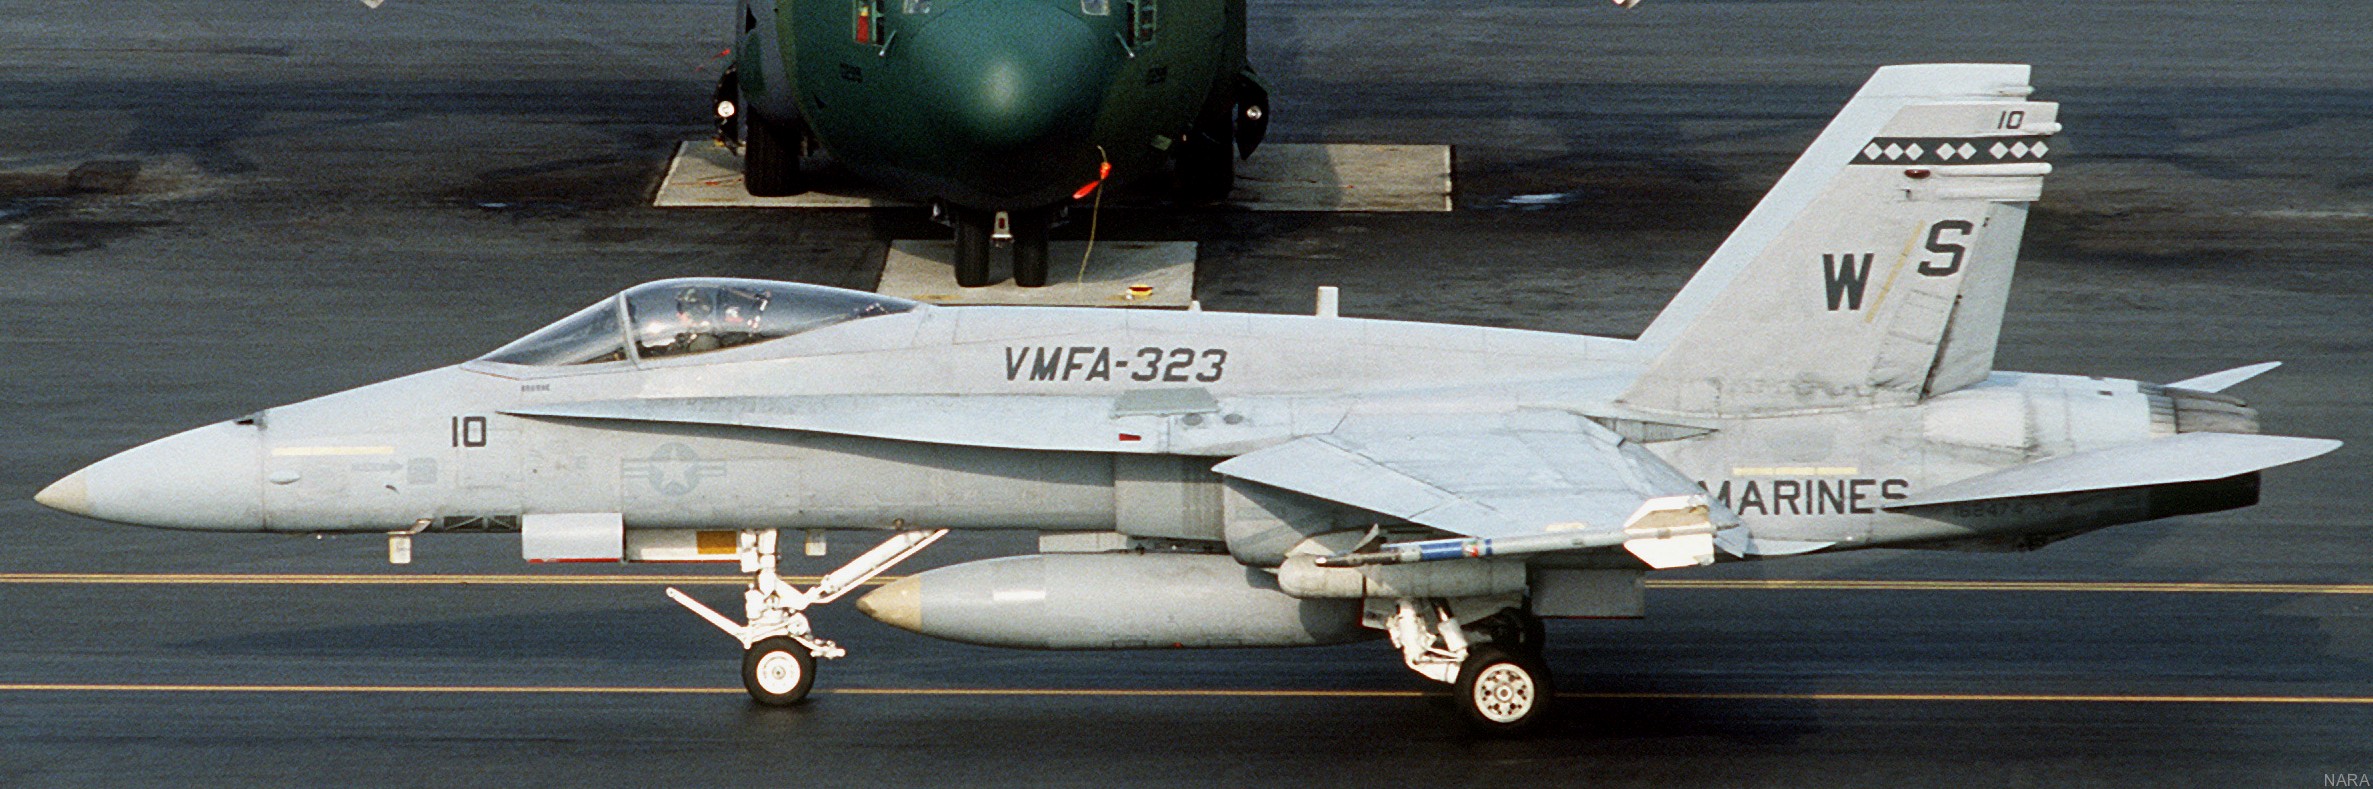 vmfa-323 death rattlers marine fighter attack squadron f/a-18a hornet 121 mcas iwakuni japan